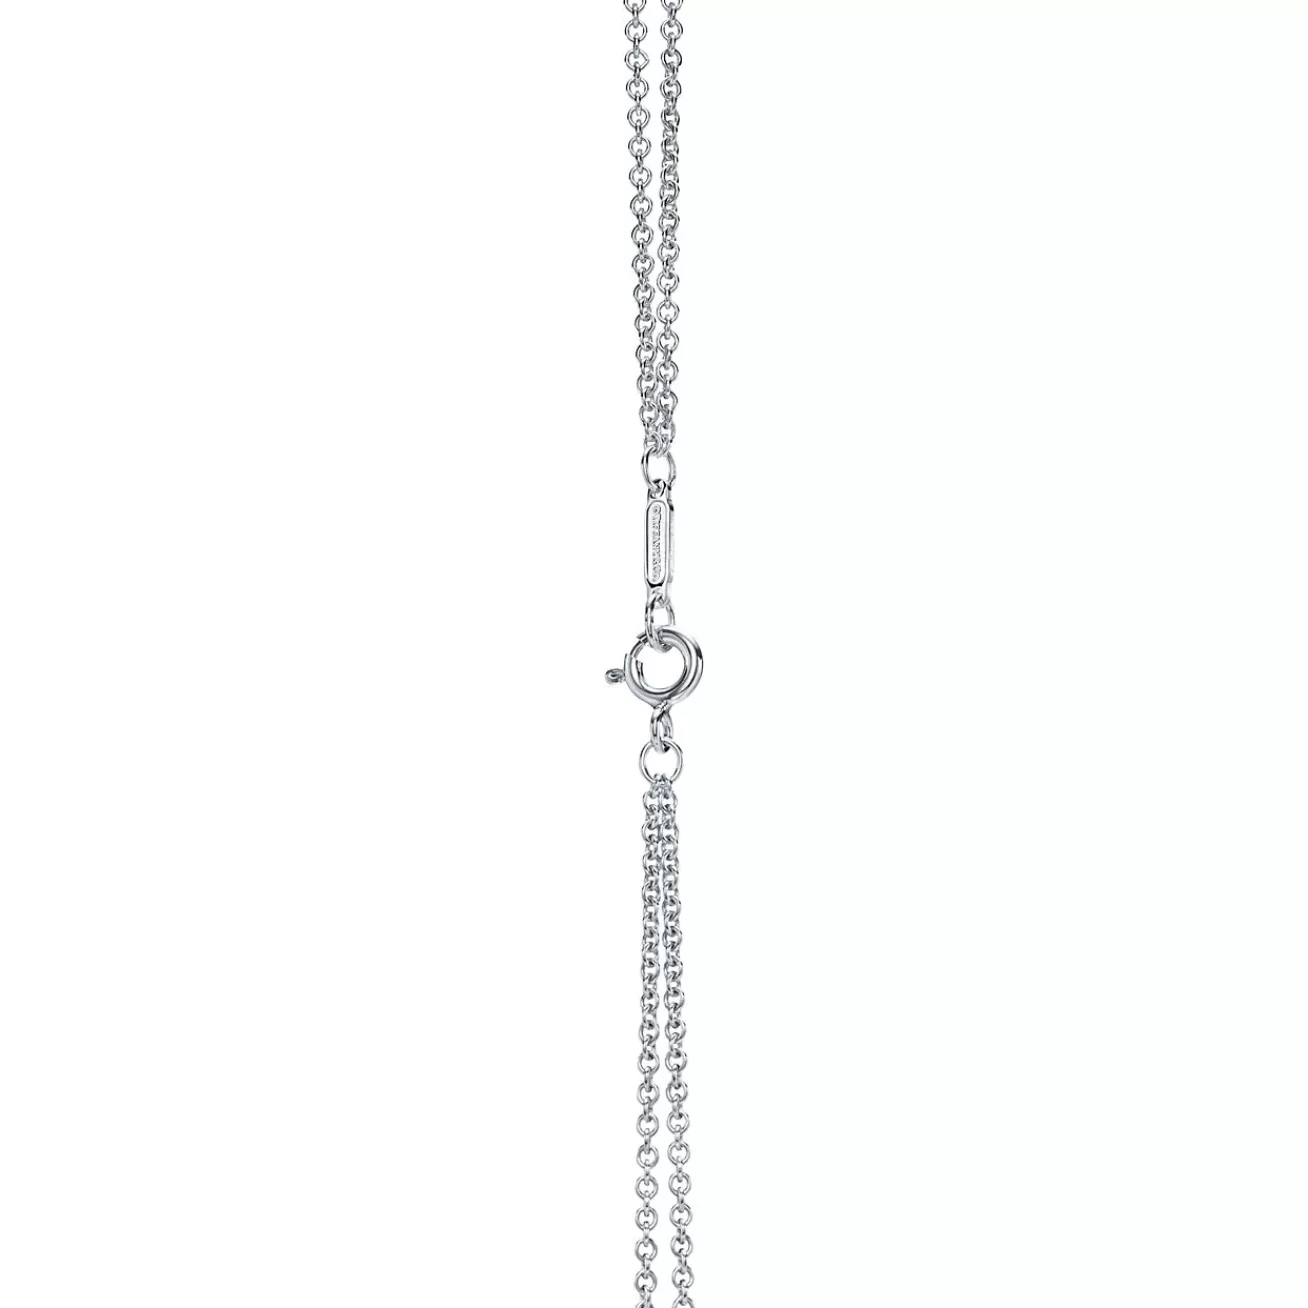 Tiffany & Co. Tiffany Infinity pendant in sterling silver on a 18" chain. | ^ Necklaces & Pendants | Gifts for Her